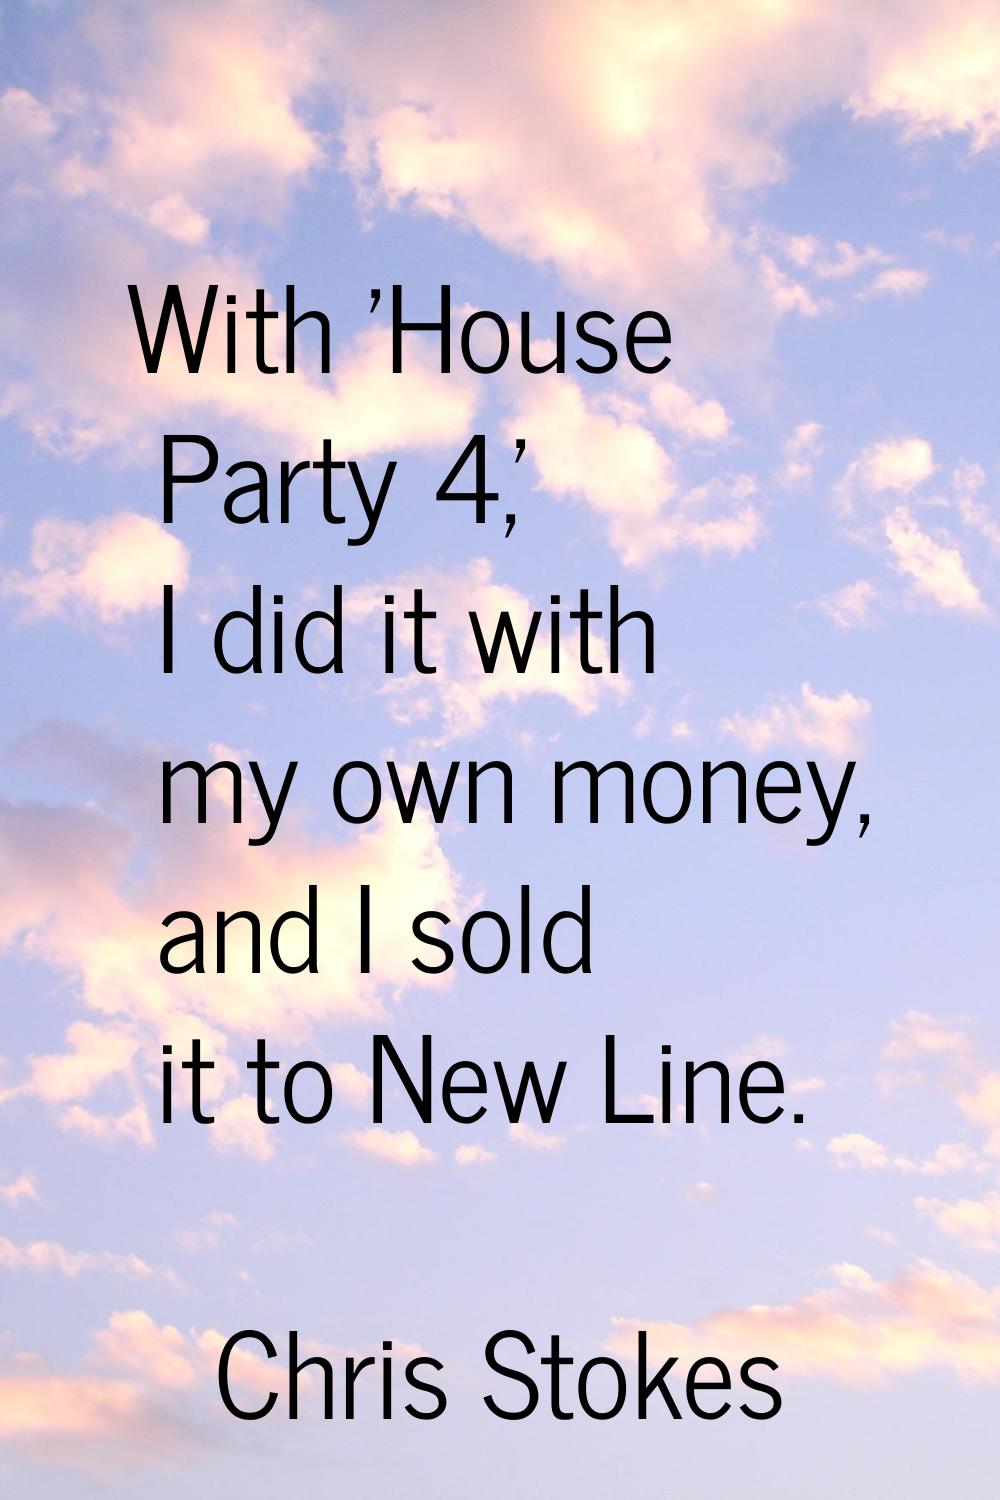 With 'House Party 4,' I did it with my own money, and I sold it to New Line.